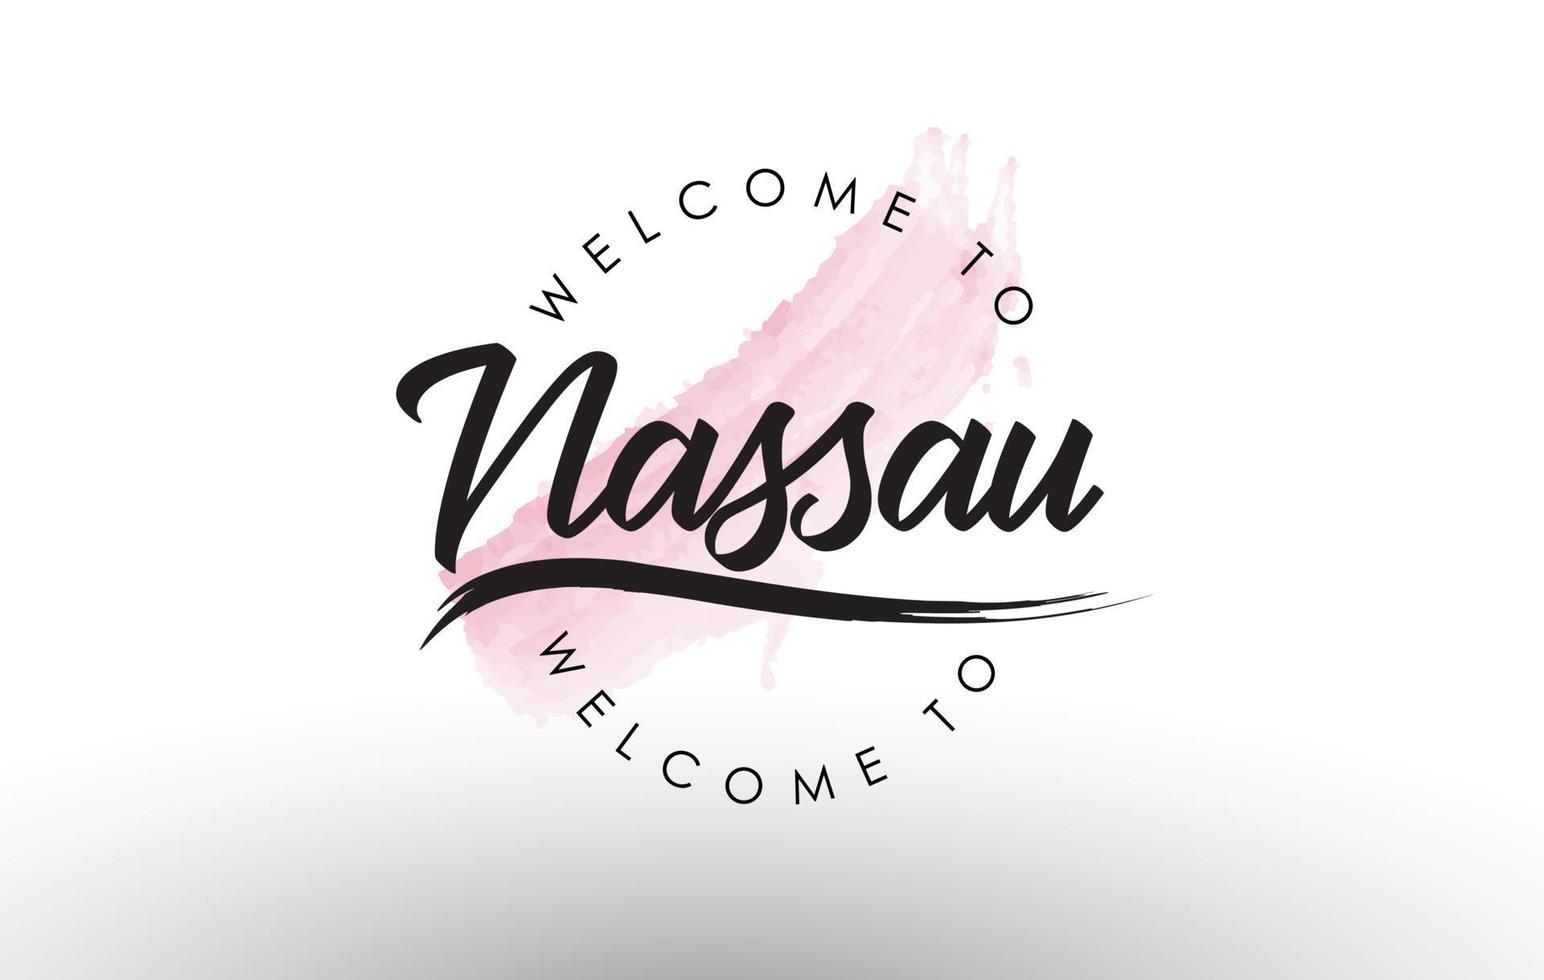 Nassau Welcome to Text with Watercolor Pink Brush Stroke vector